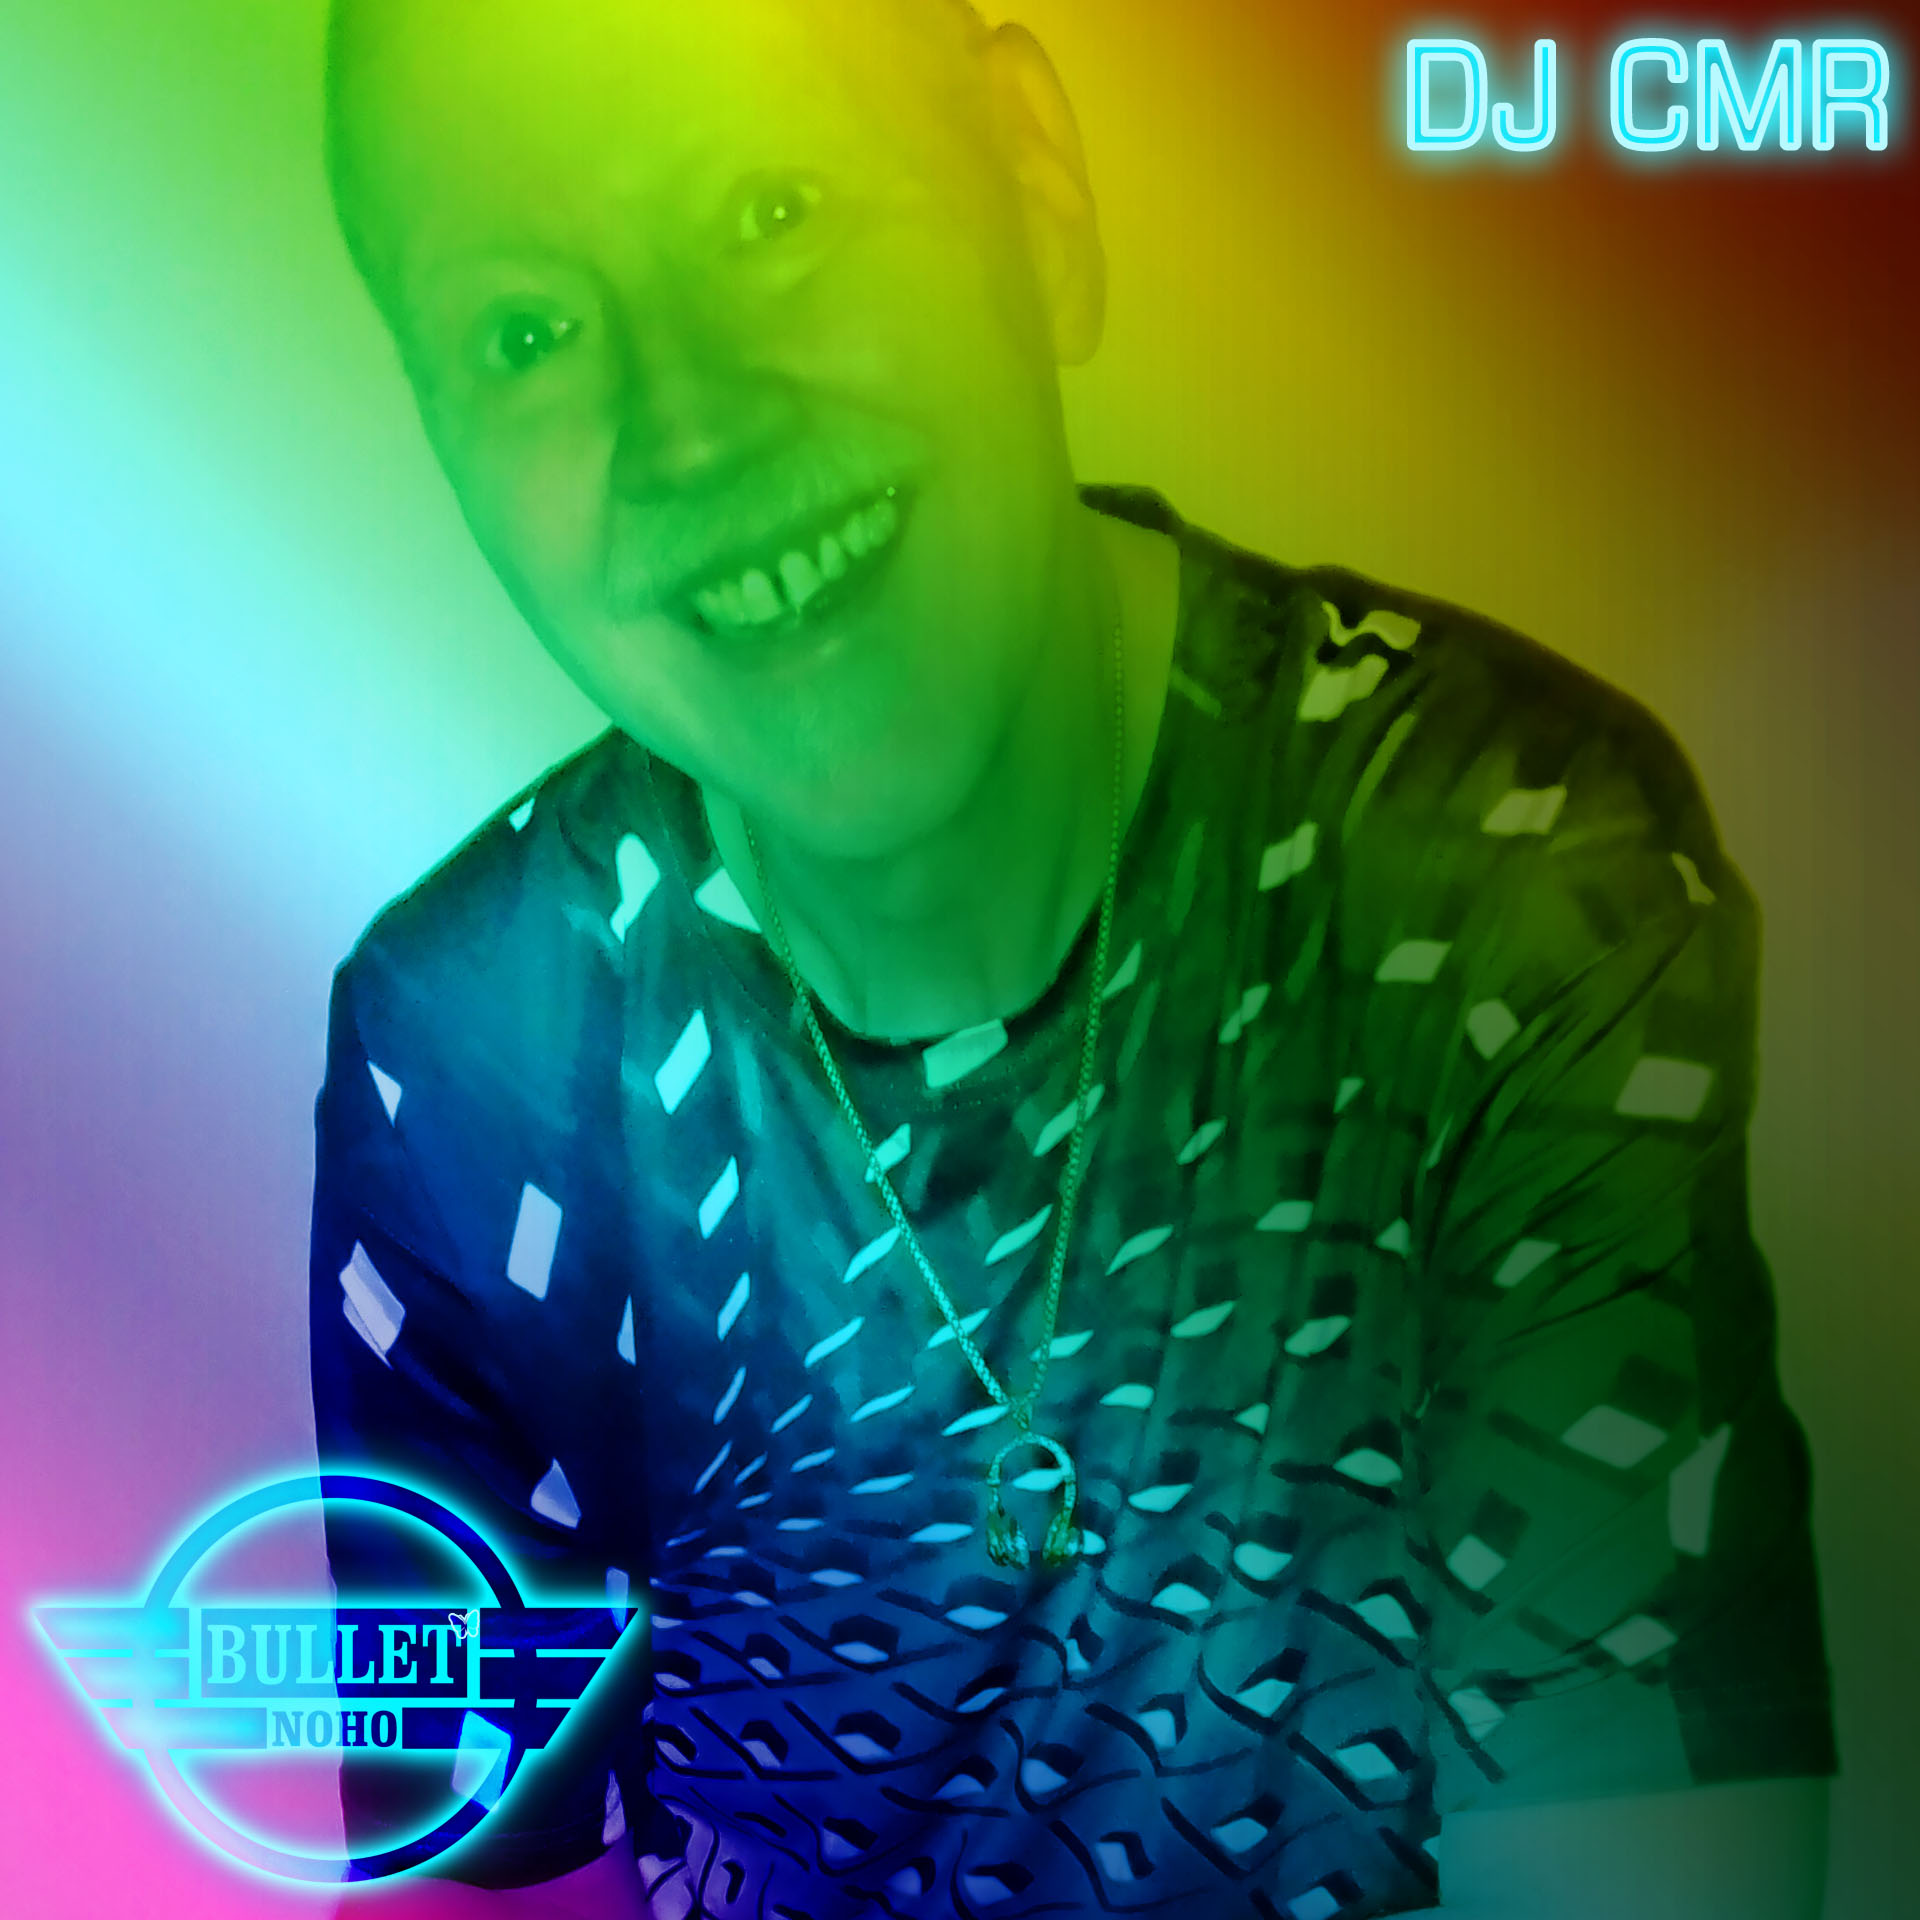 DJ CMR: Sunday, 05/05/24 from 3:00 PM to 8:00 PM